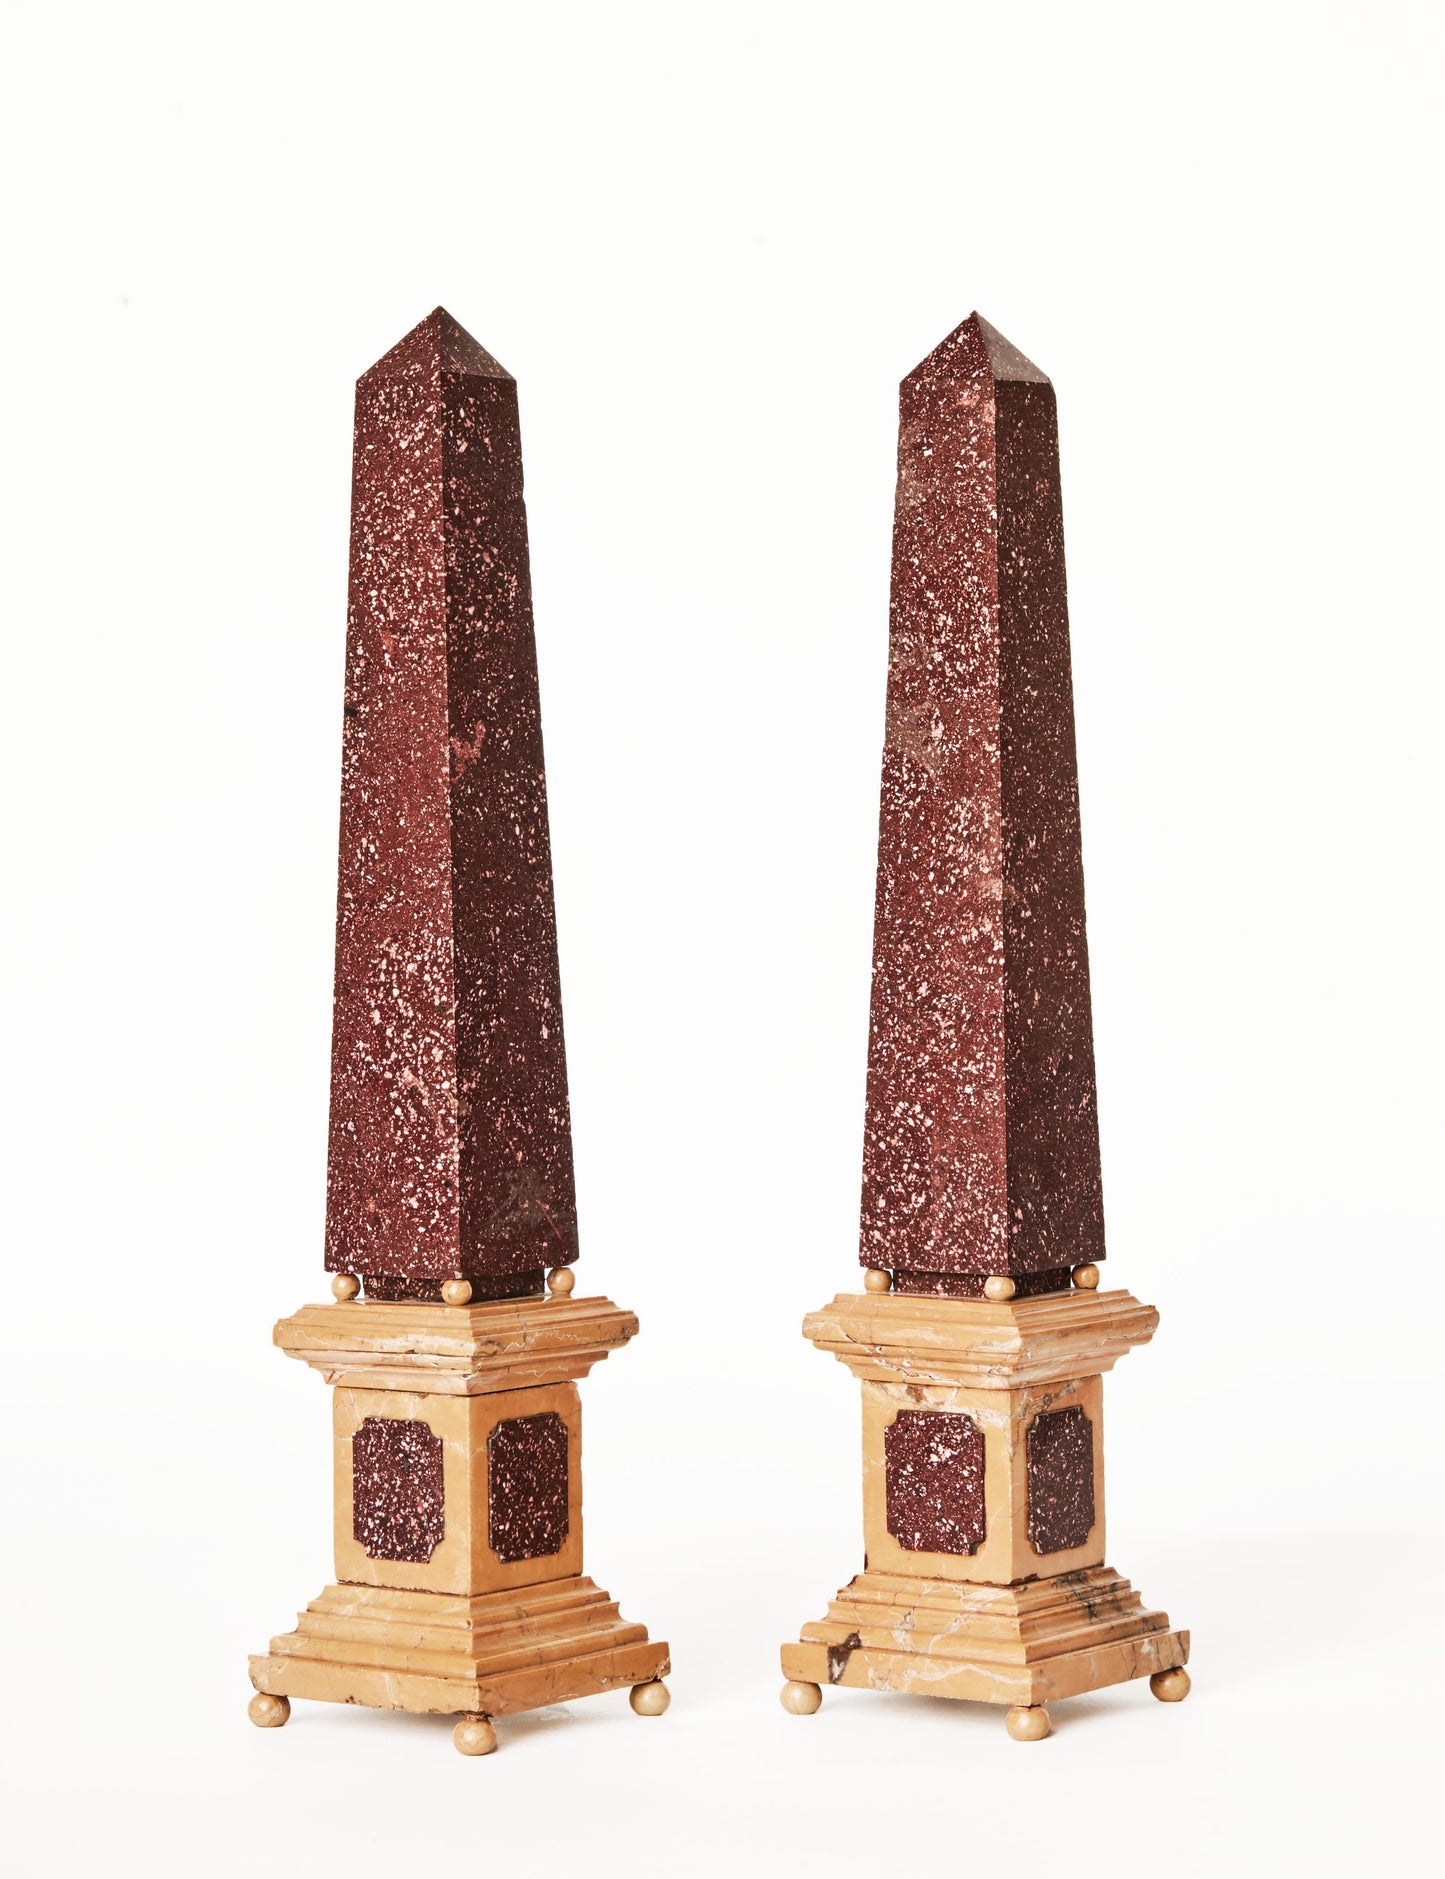 A Pair of Grand Tour Porphyry and Sienna Marble Obelisks, Italian, 19th Century